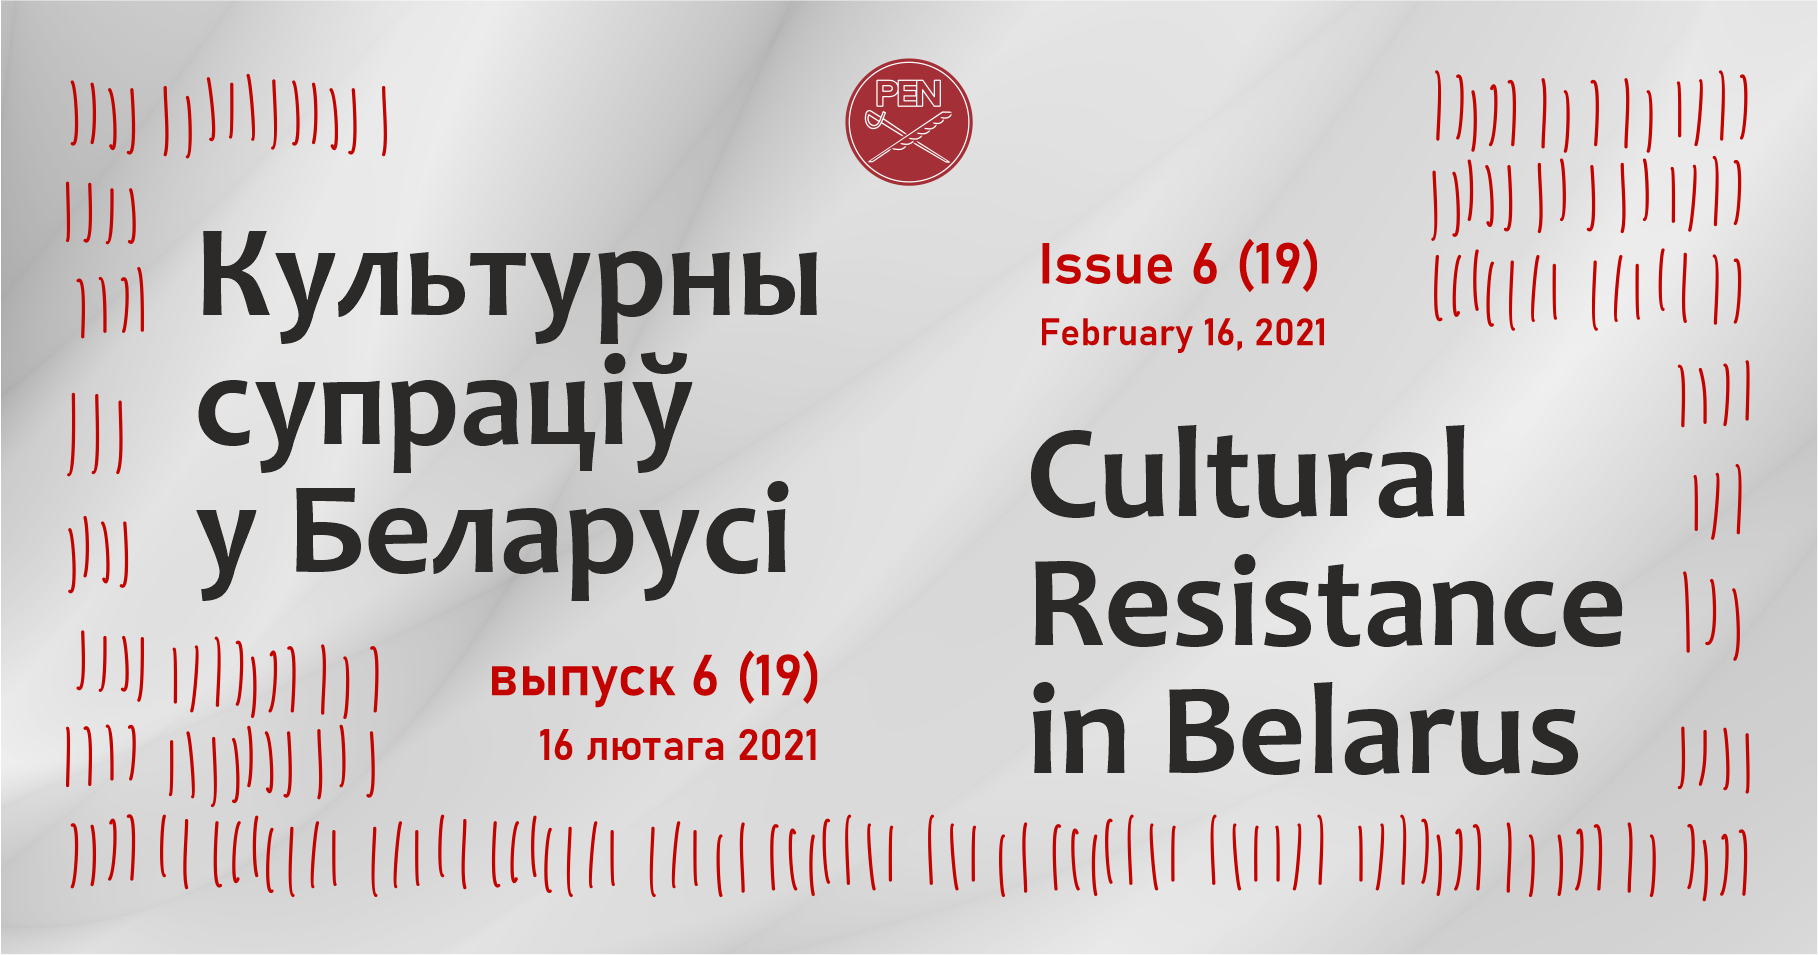 “Being Worthy of such a People” – Belarusian Culture During the Socio-political Crisis: Issue 19